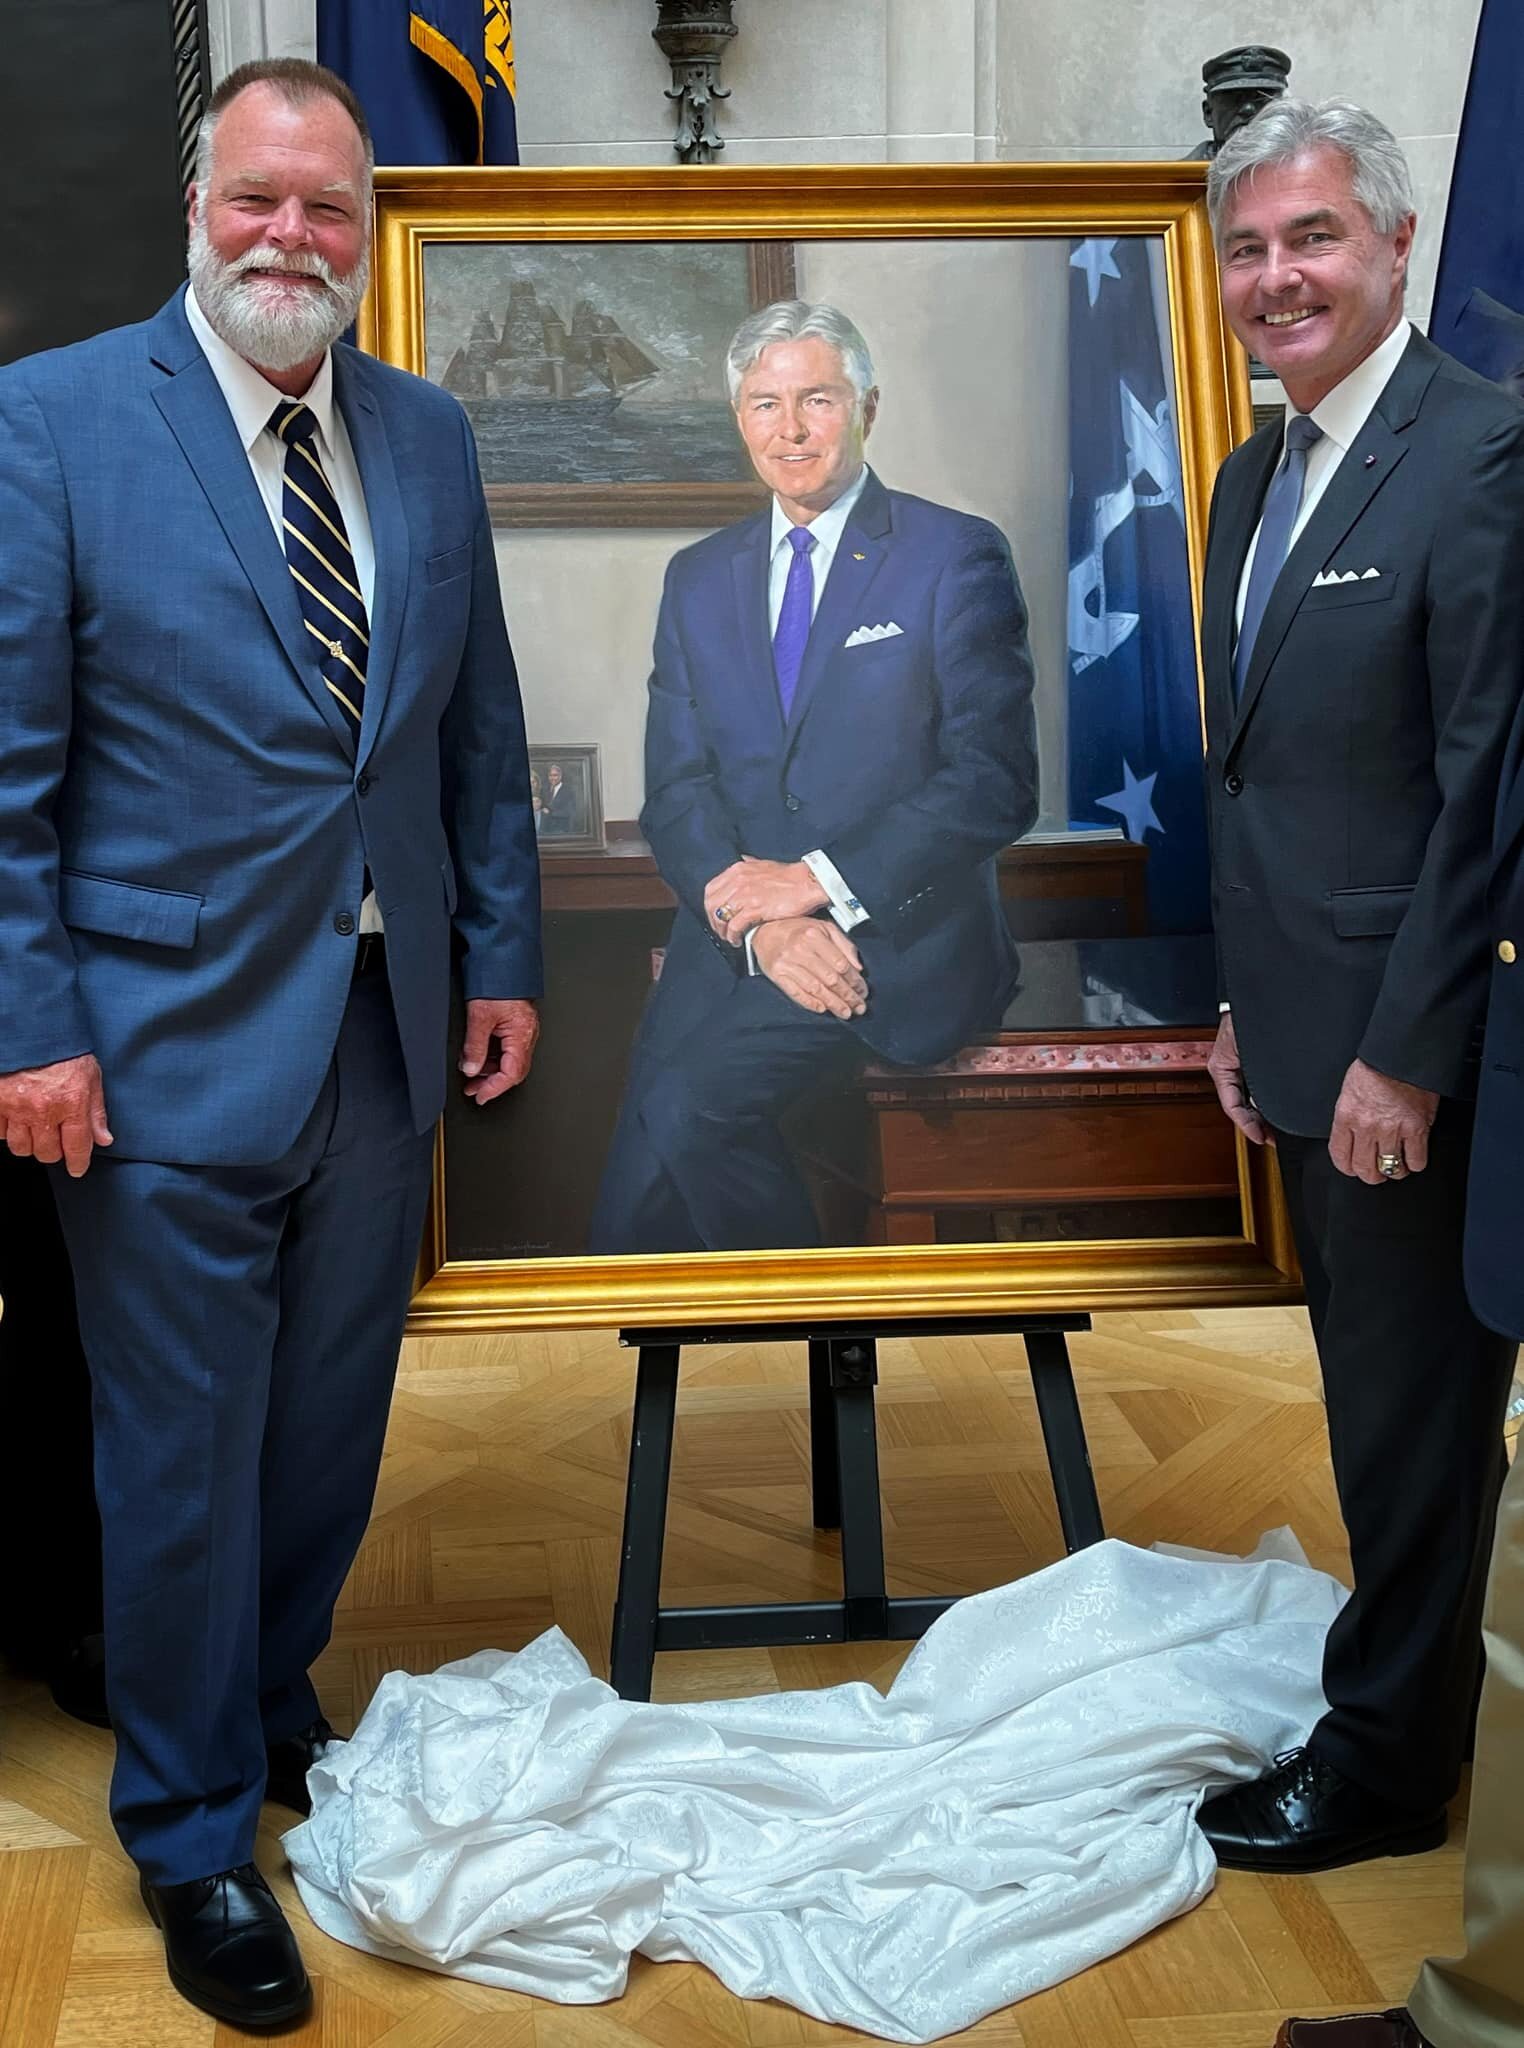 Very proud to join my friend, Ambassador Ken Braithwaite, as he unveiled his official Secretary of the Navy Portrait during a ceremony held at the U.S. Naval Academy.